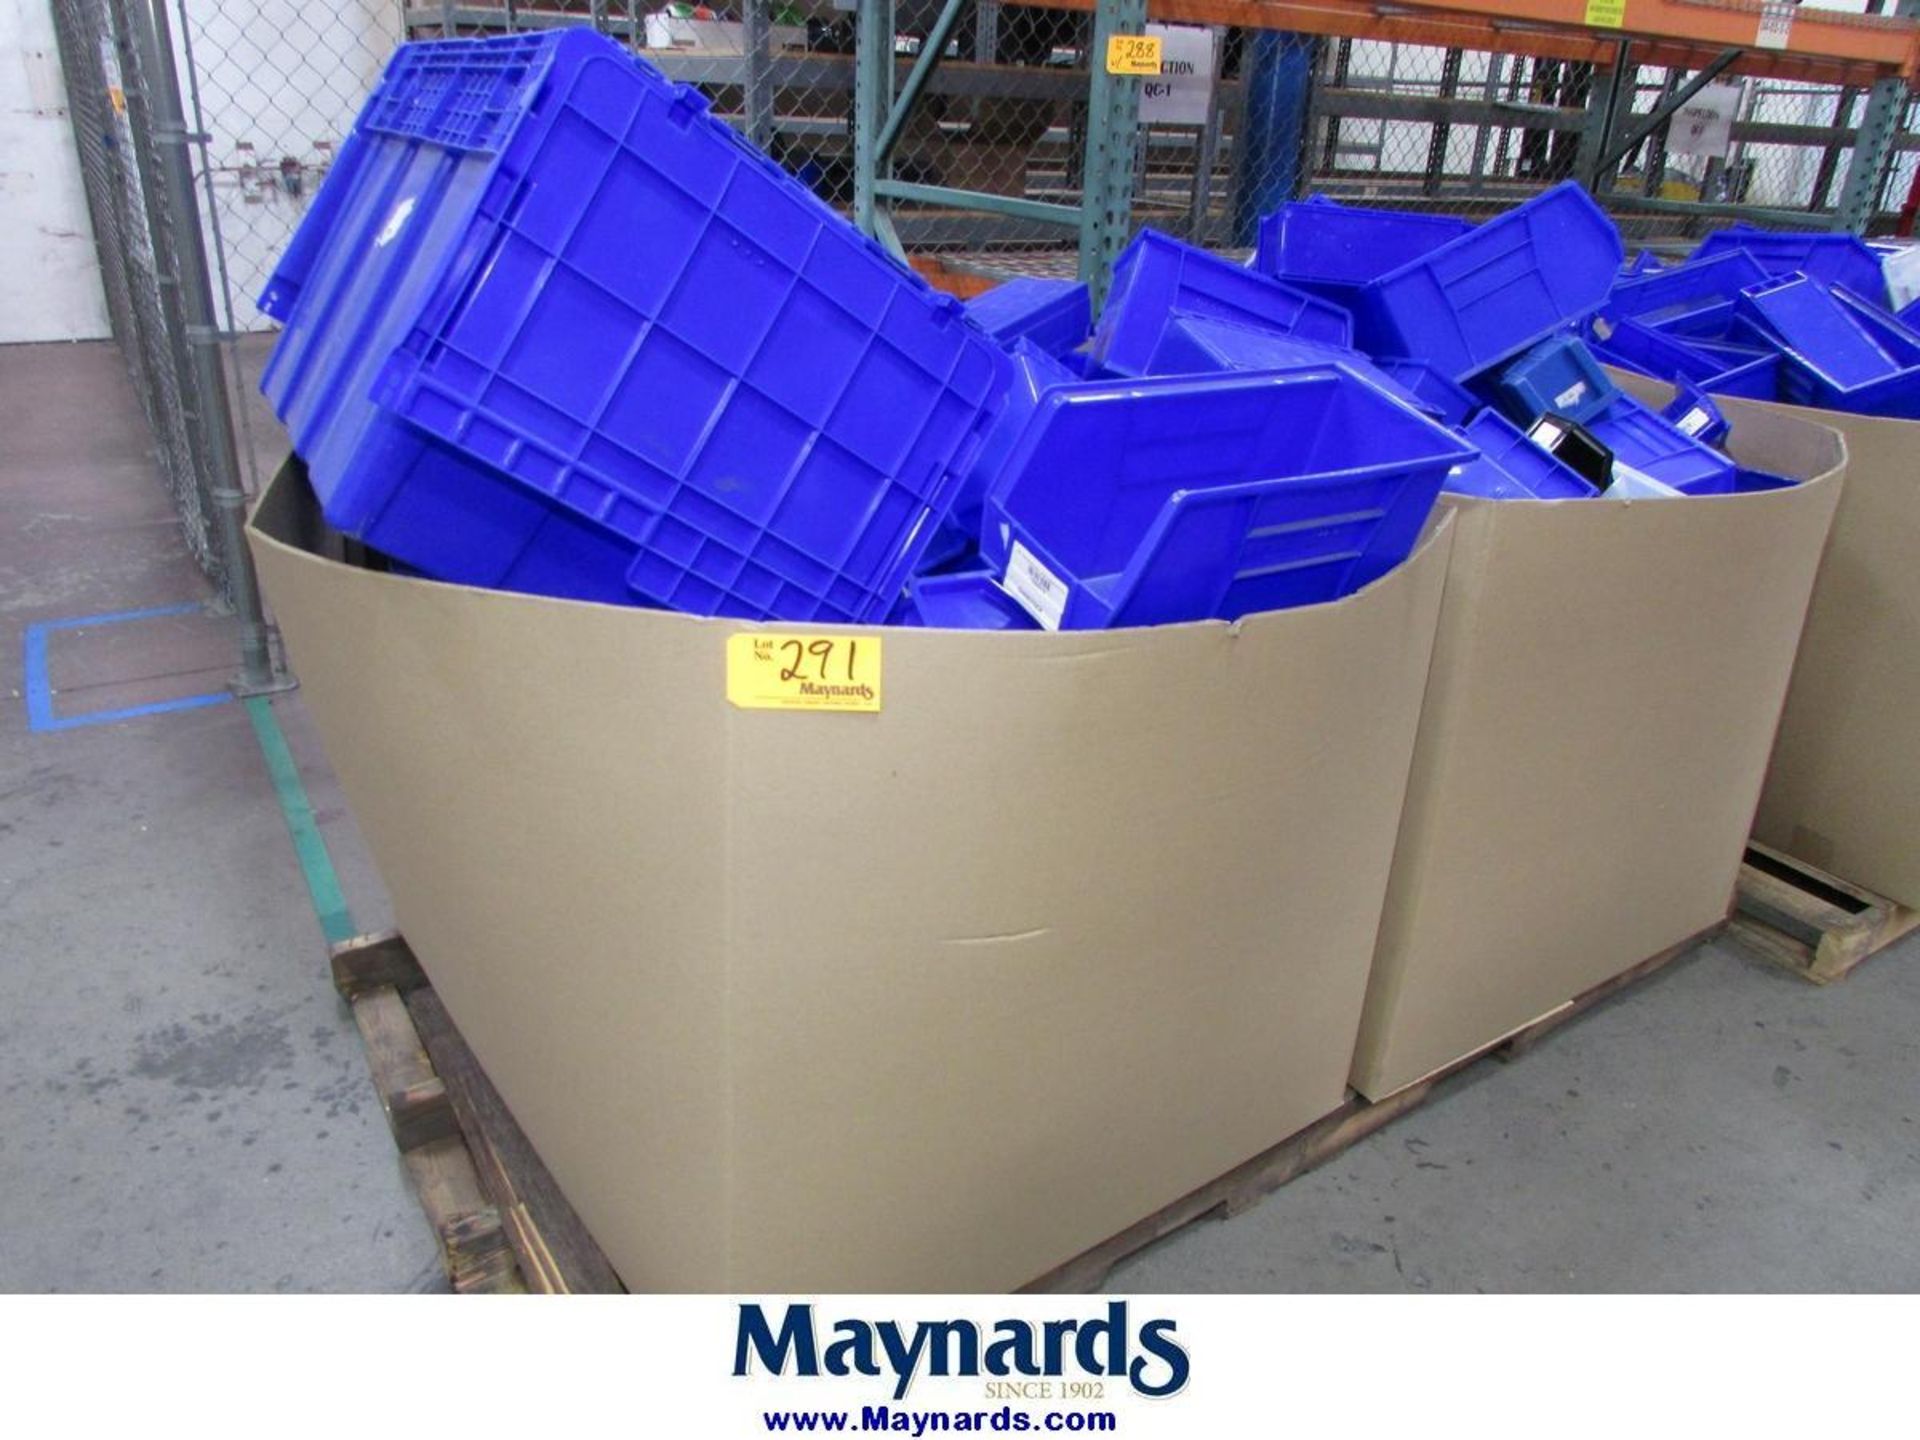 (2) Gaylords of Assorted Plastic Stackable Storage Bins